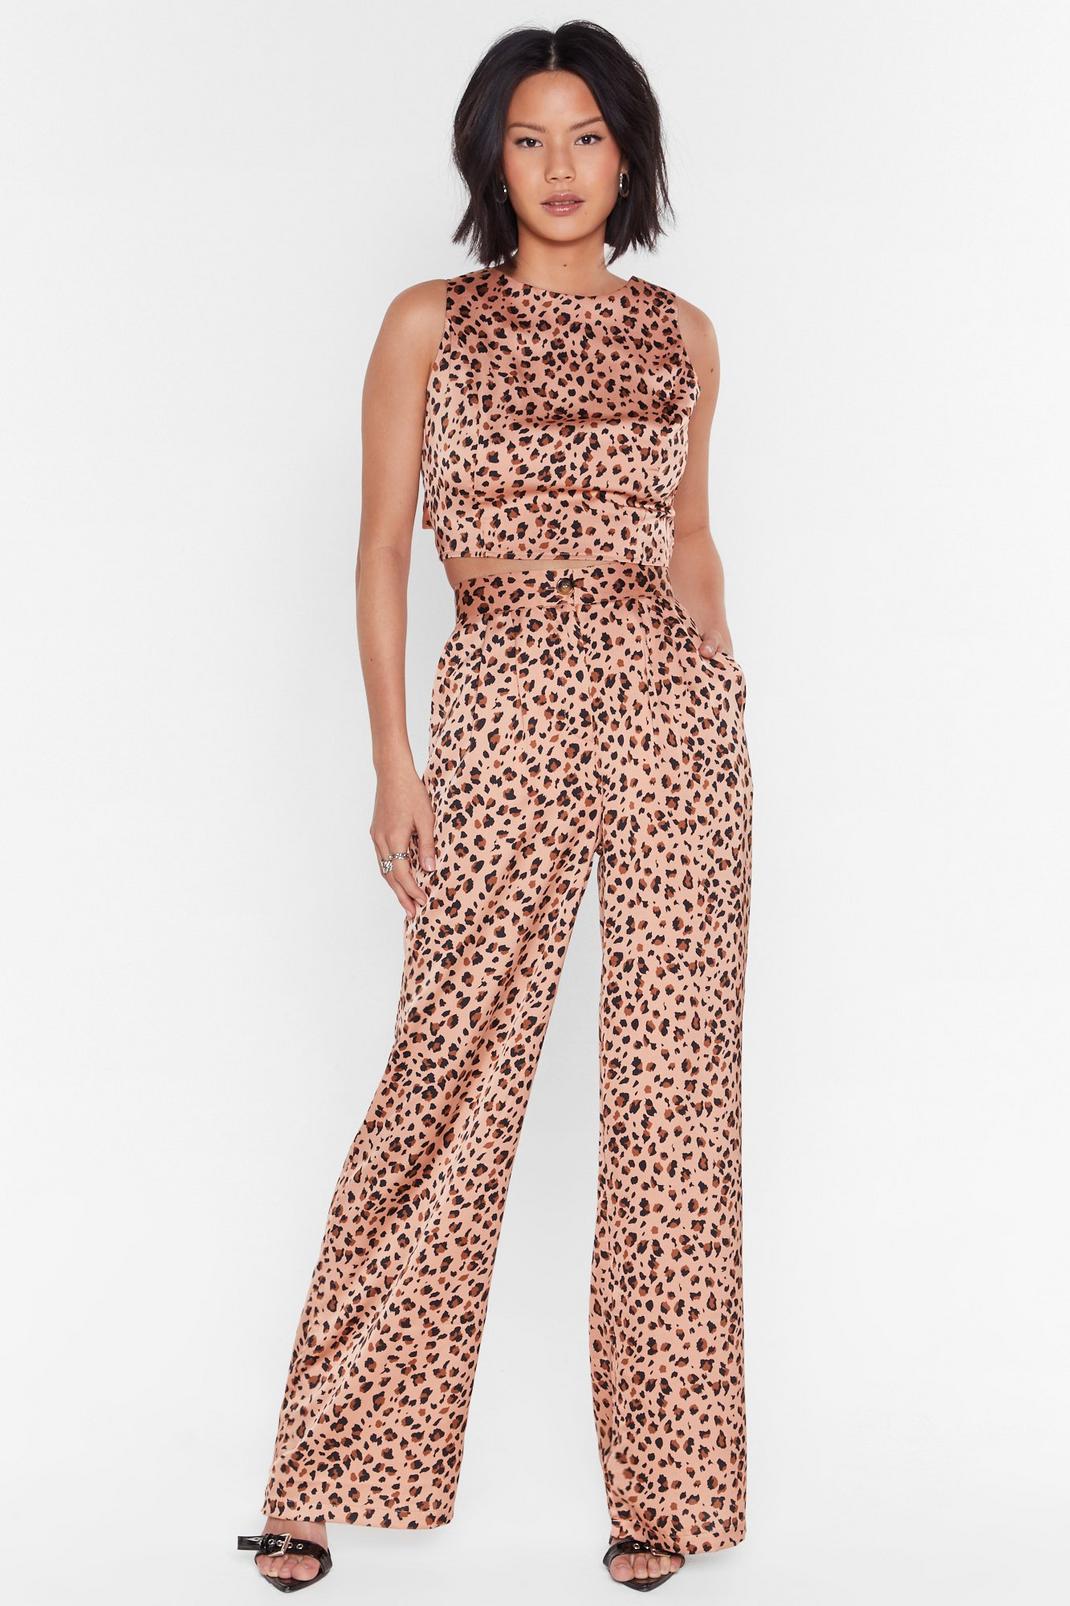 Blush Meow Does She Do It Leopard Satin Pants image number 1